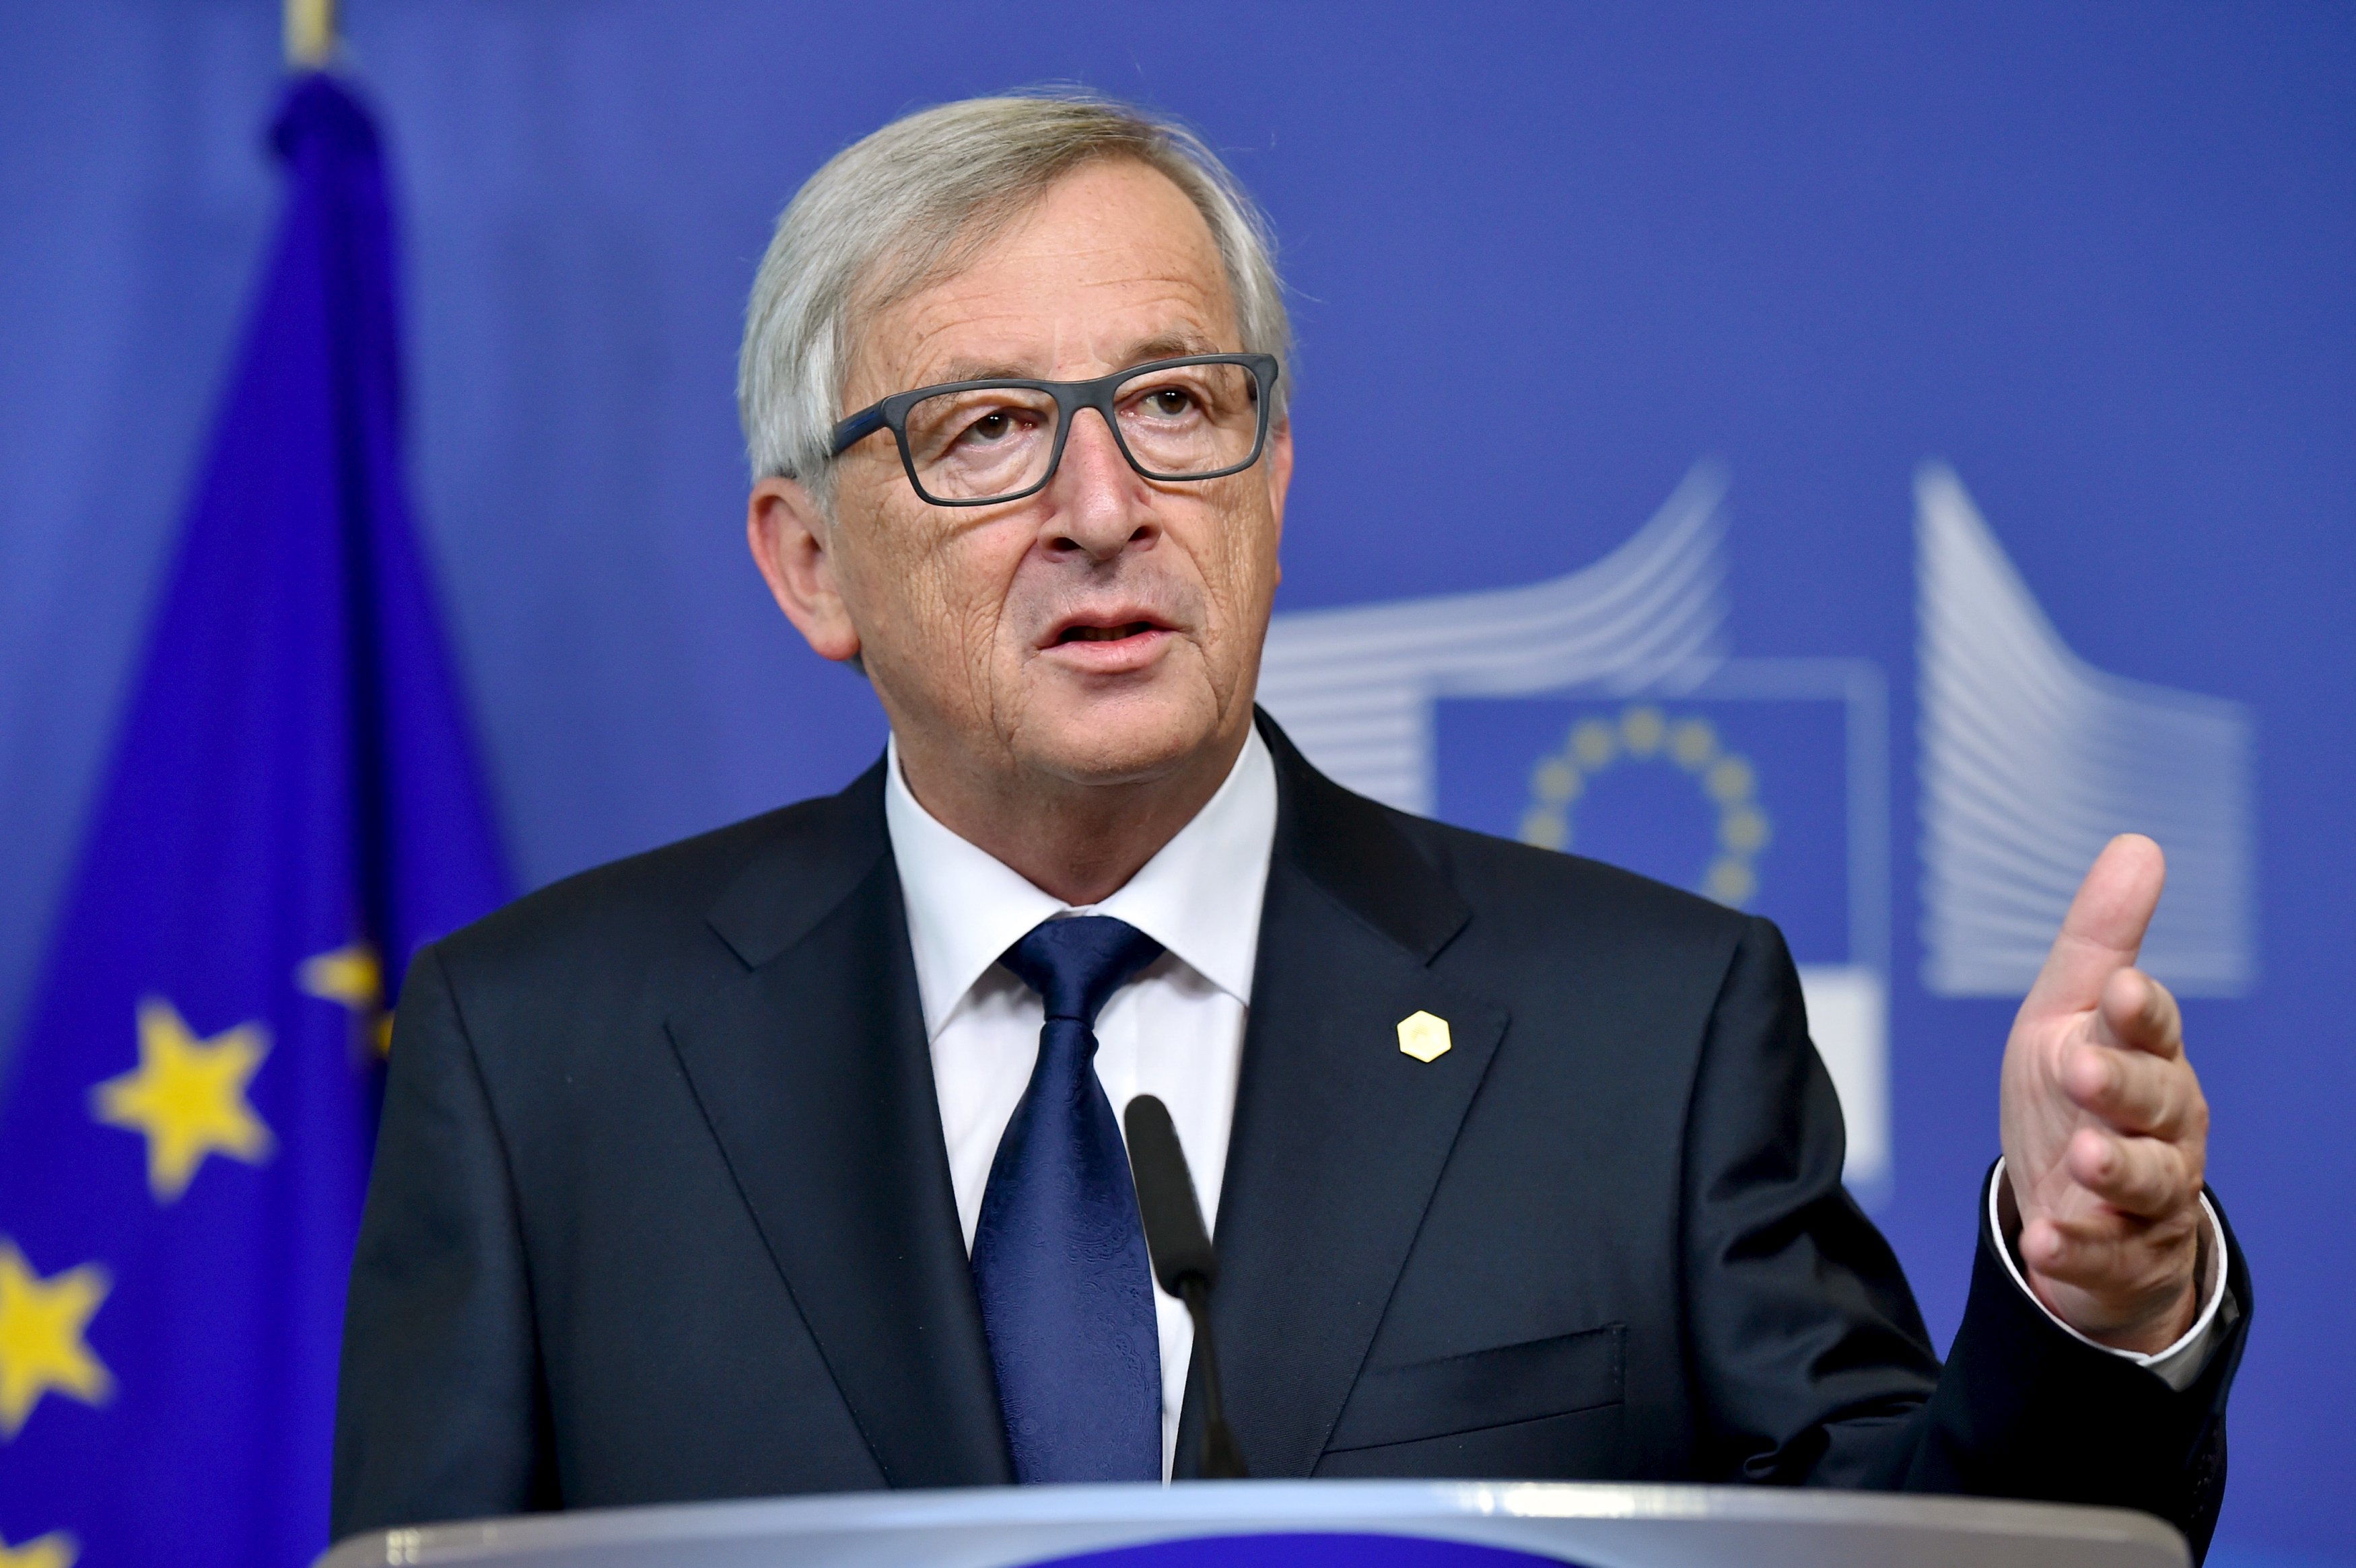 European Commission President Jean-Claude Juncker gives a joint news conference with European Parliament President Martin Schulz at the European Commission headquarters prior to an extraordinary summit in Brussels